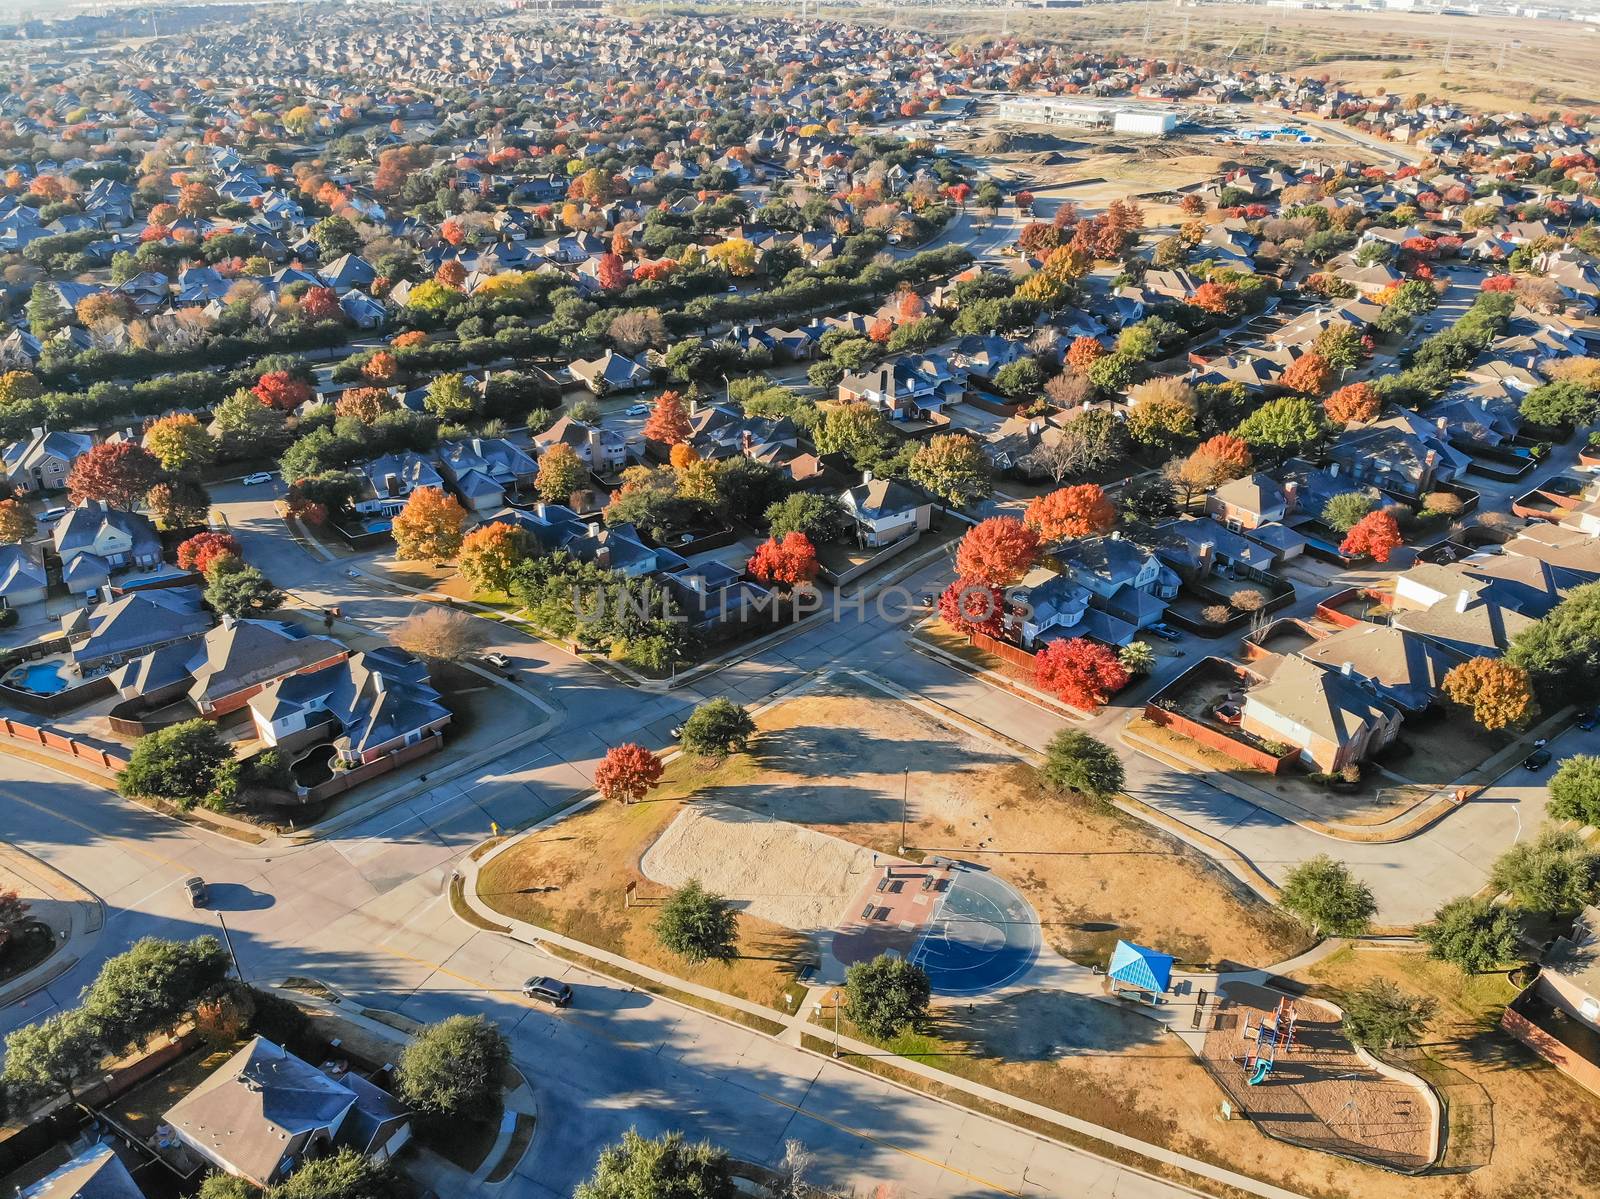 Aerial view community playground near urban sprawl with colorful by trongnguyen